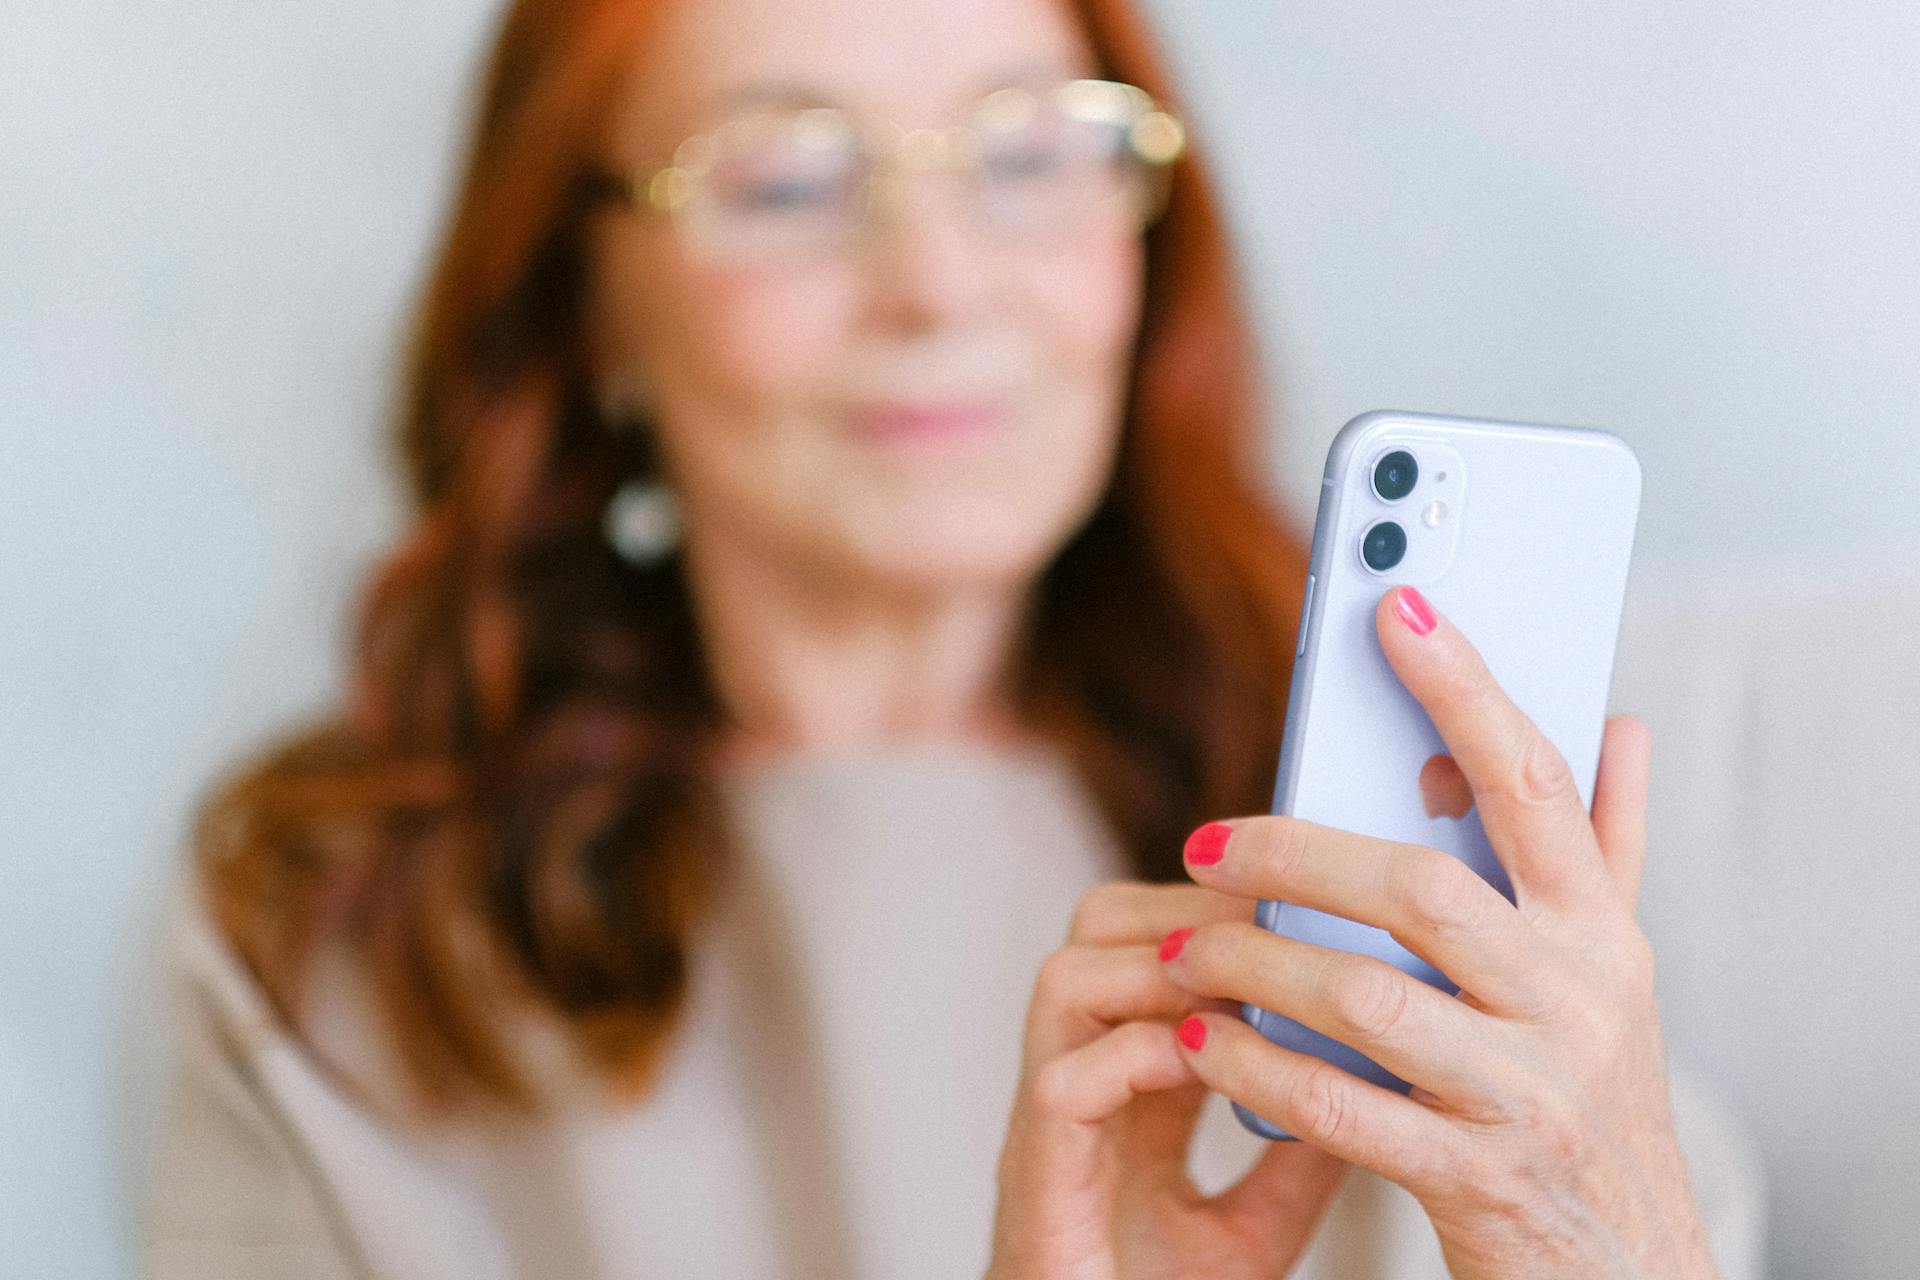 An older woman on the phone | Source: Pexels